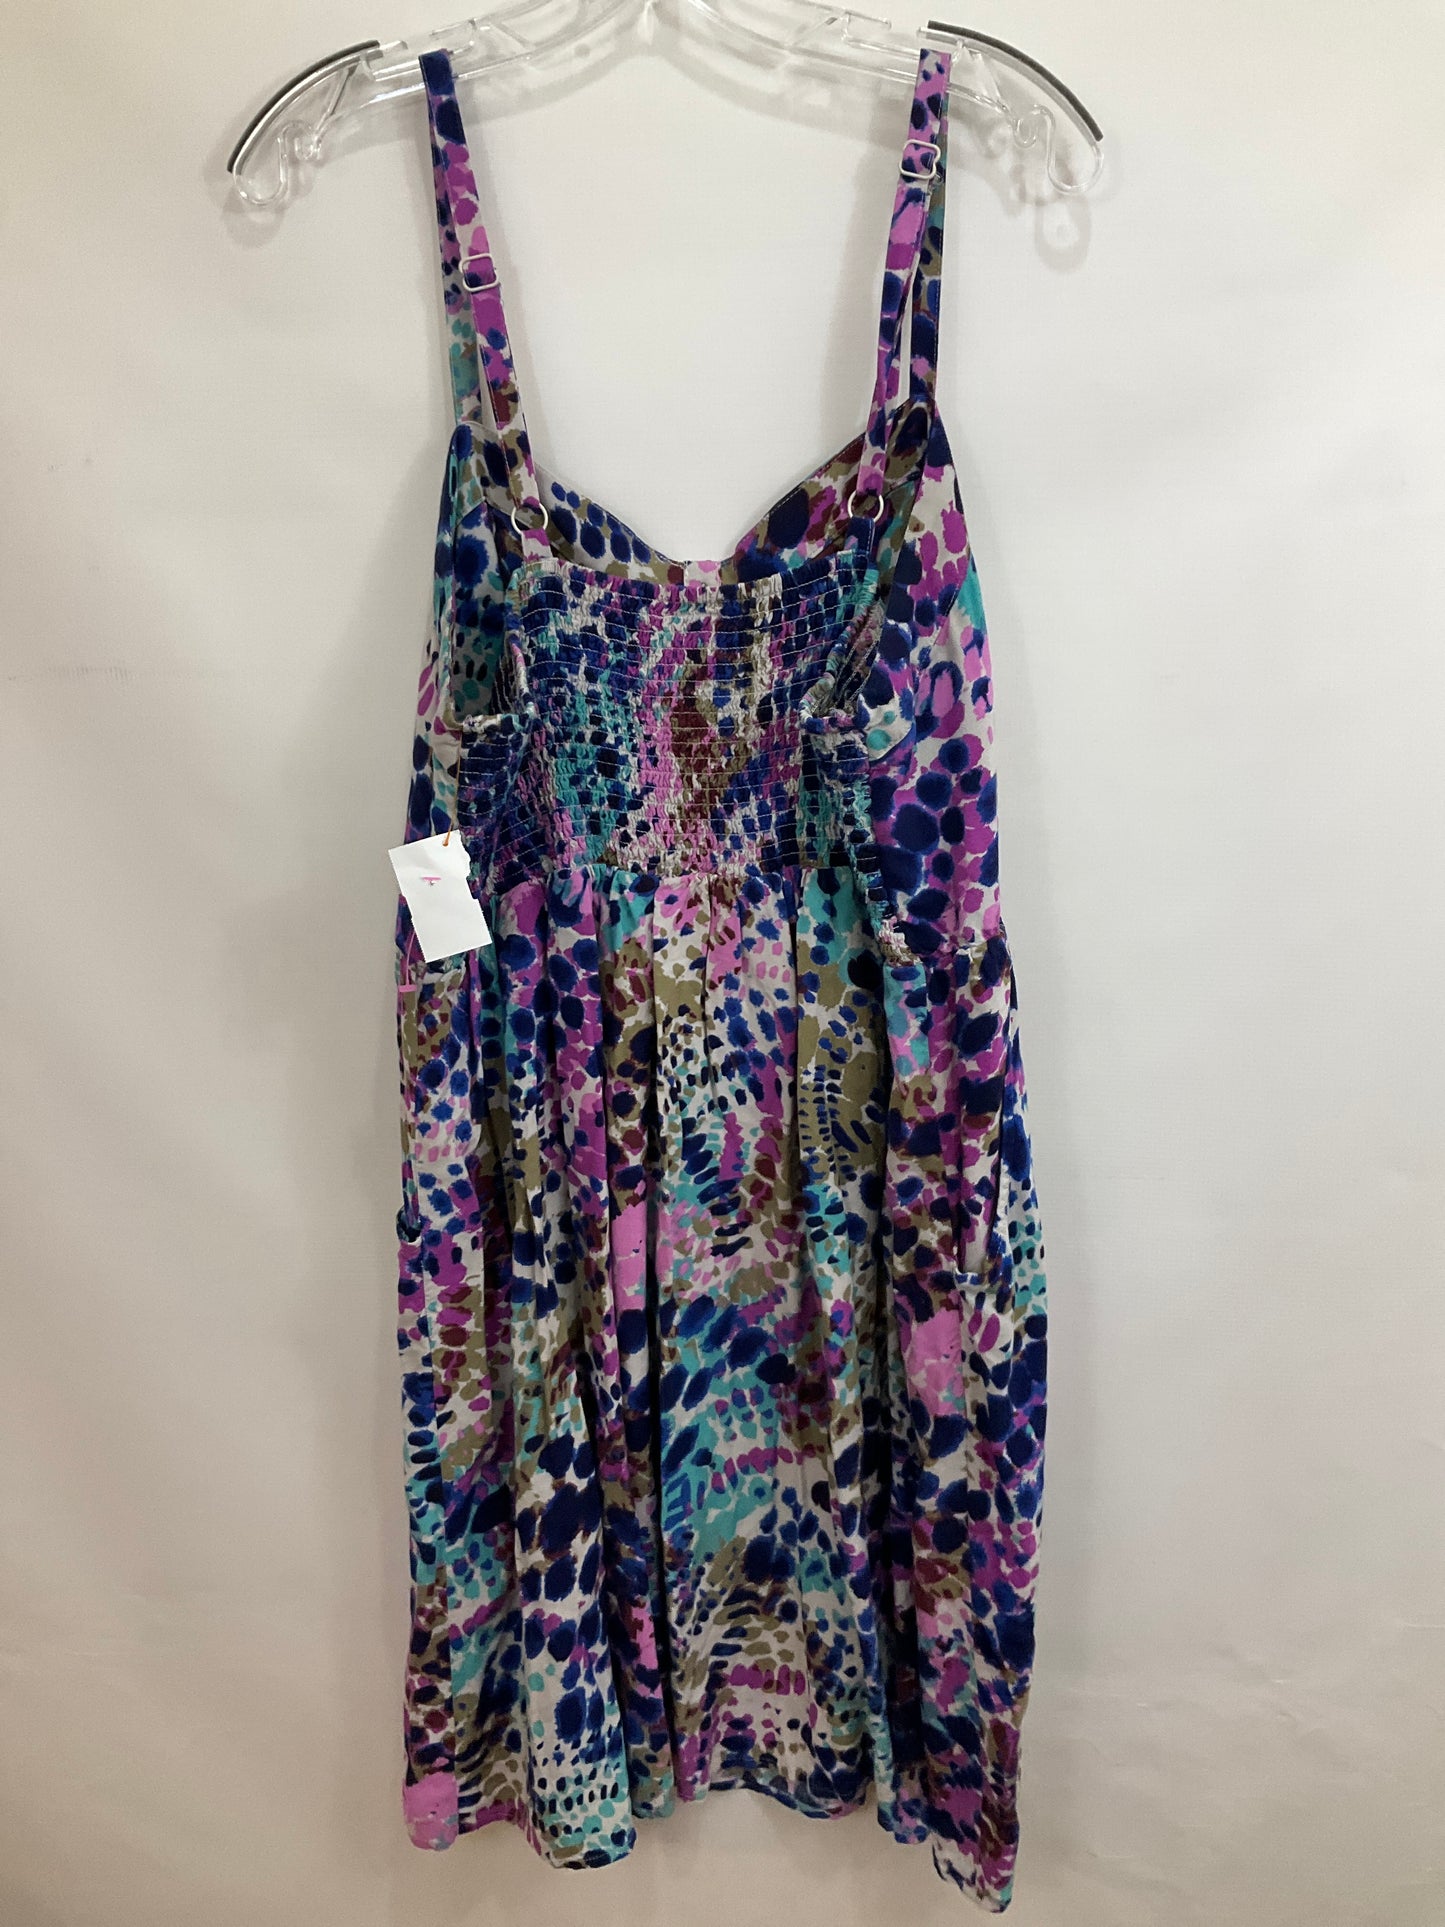 Dress Casual Short By Torrid  Size: 4x